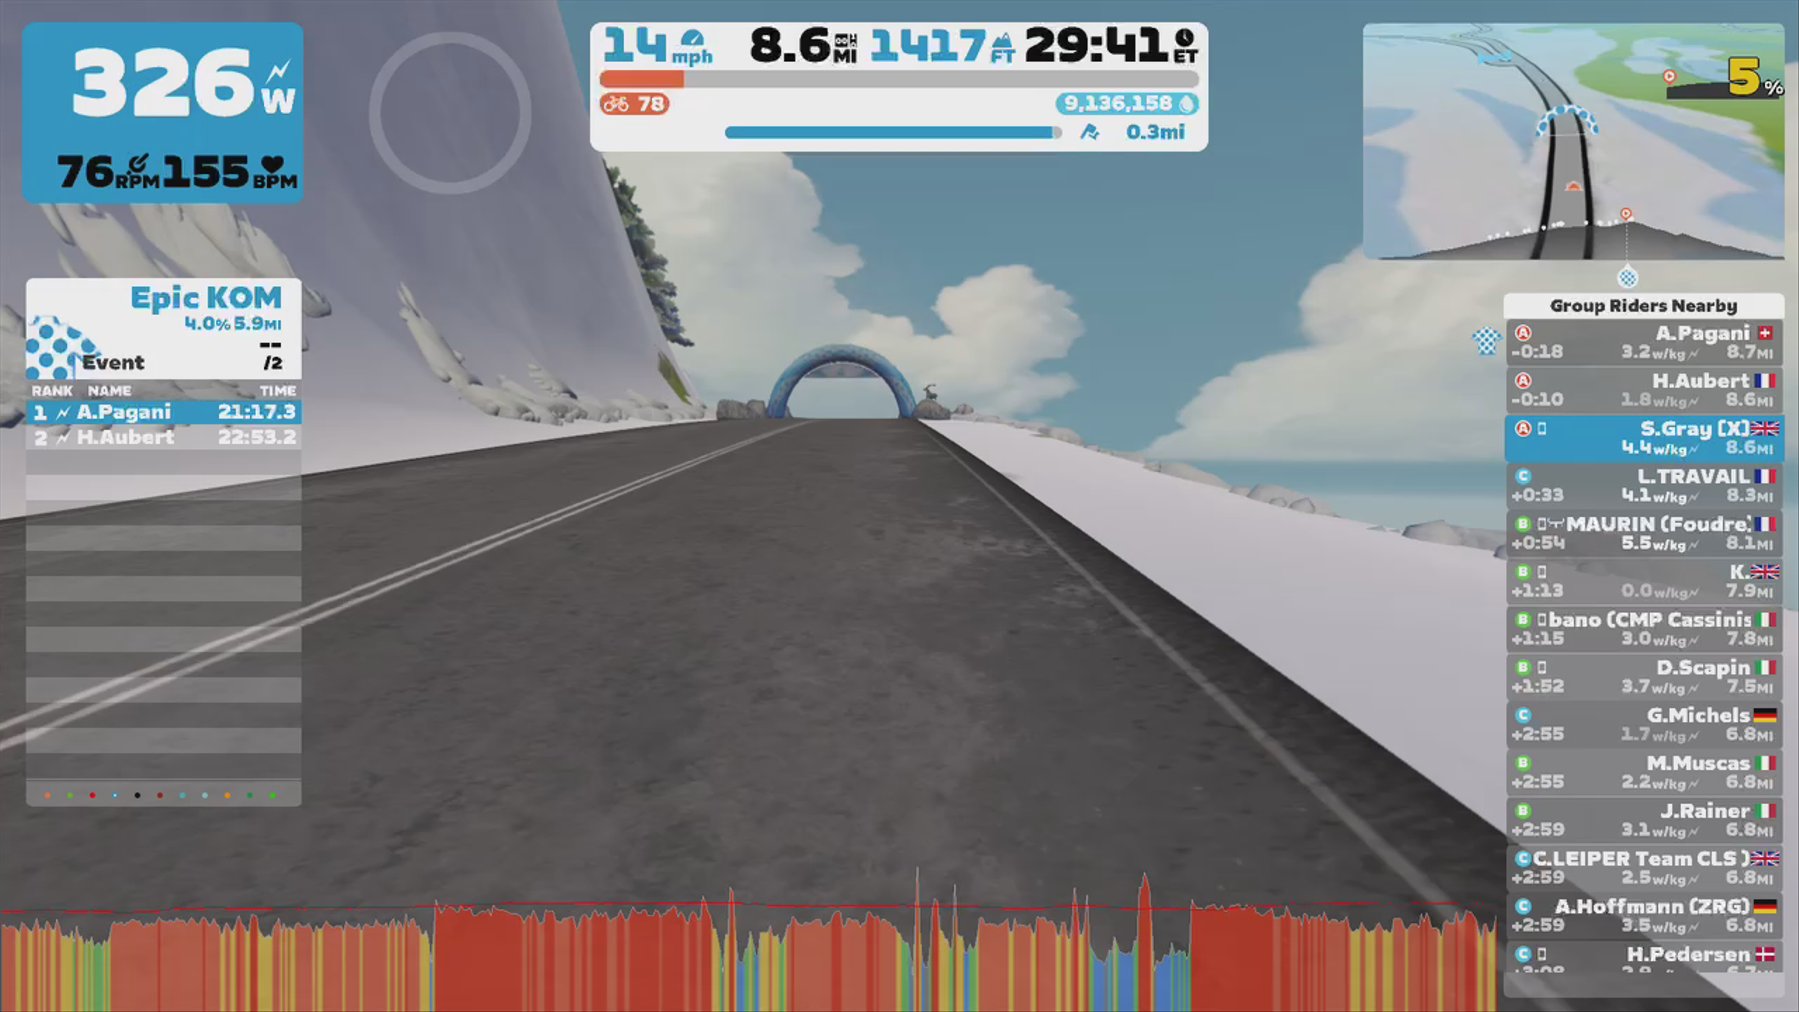 Zwift - Race: Zwift Hill Climb Racing Club - Epic KQOM Forwards (A) on Mountain Route in Watopia